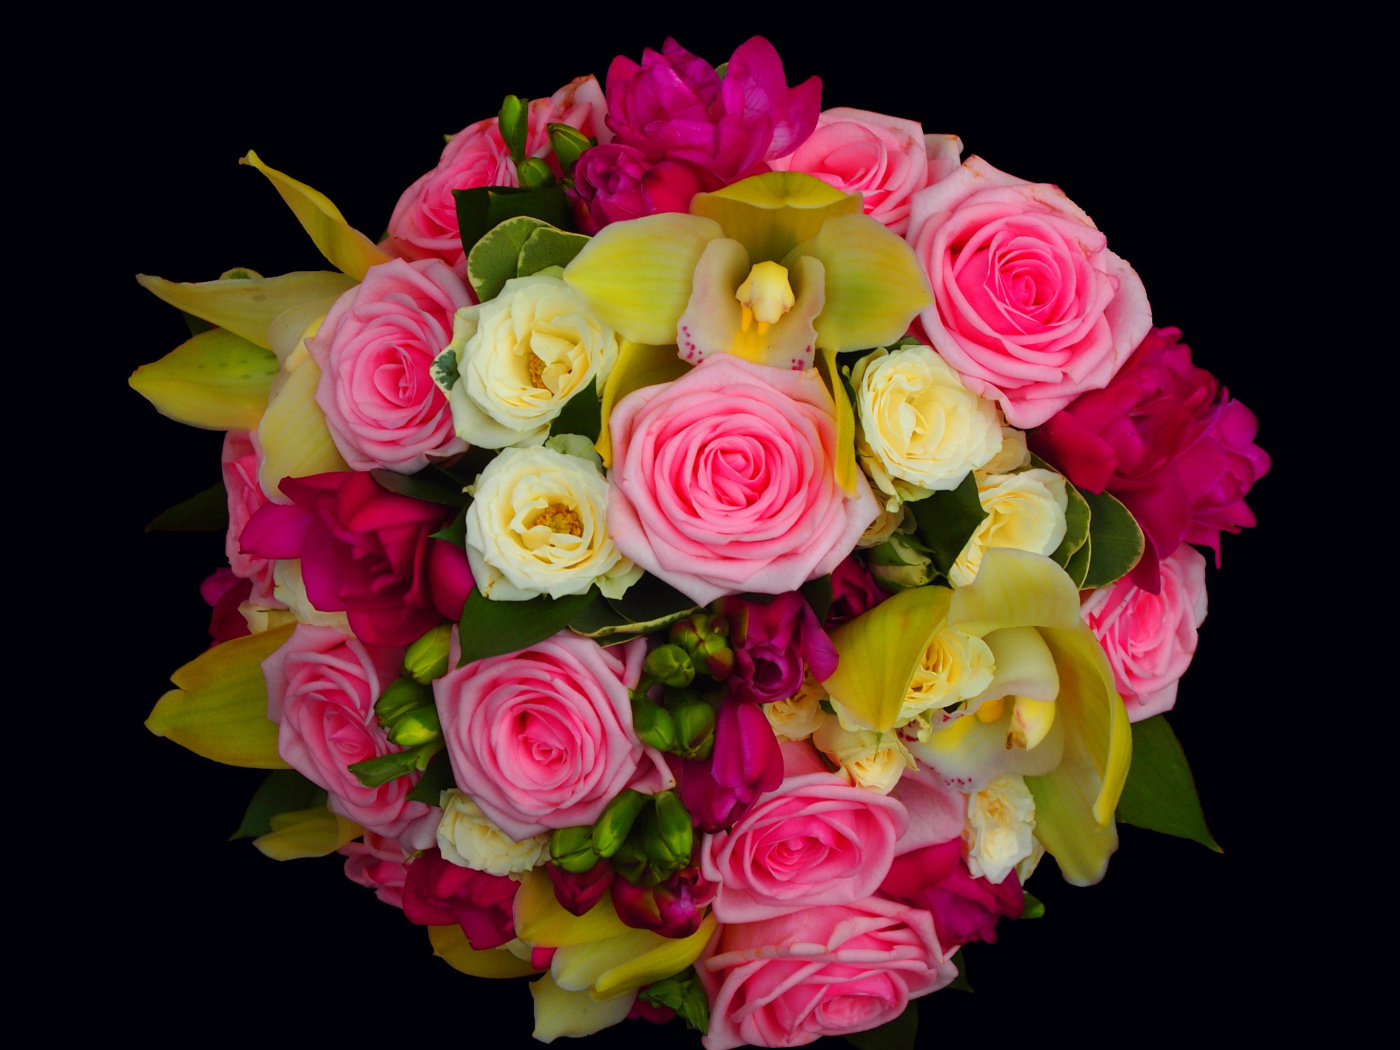 Bouquet of roses and yellow orchid, floristry wallpaper 1400x1050